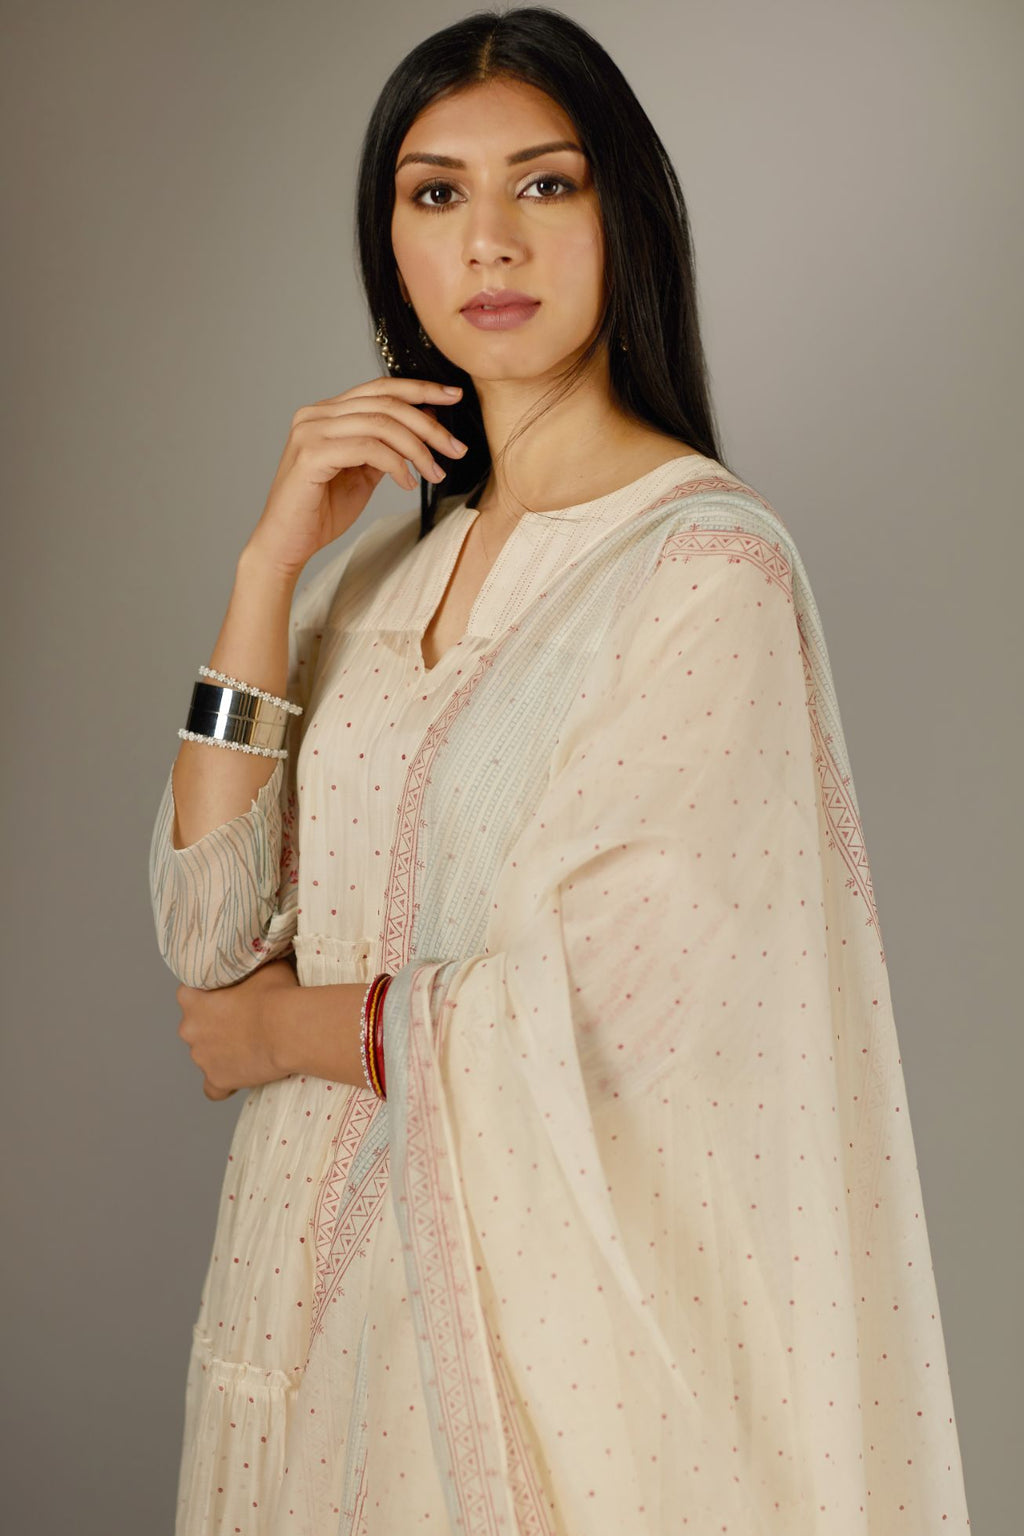 Multi-tiered hand block printed kurta set detailed with an all-over quilted and printed yoke.